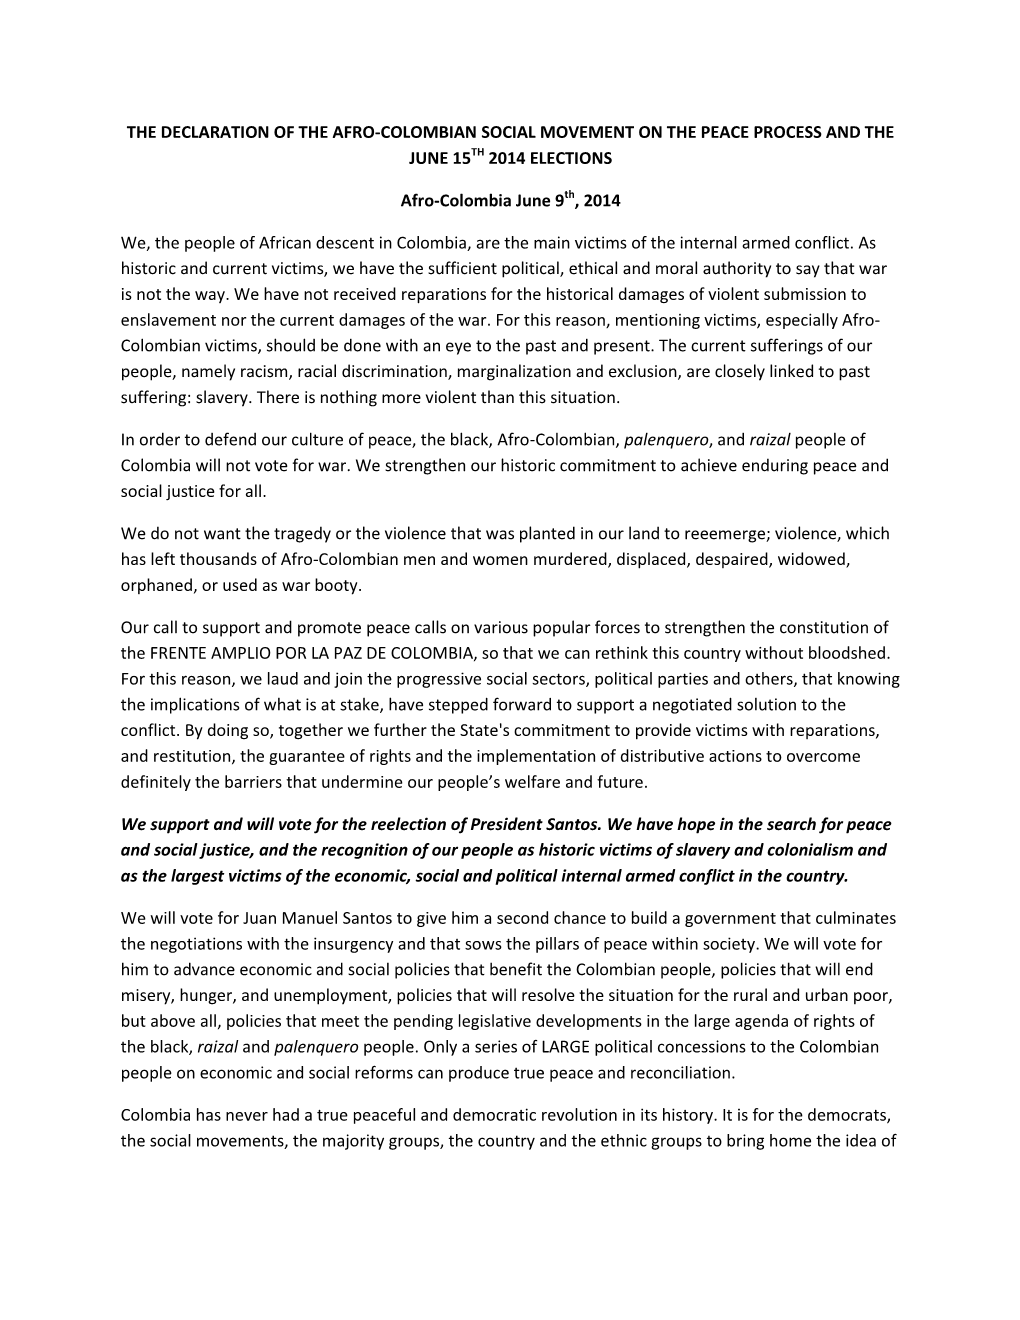 The Declaration of the Afro-Colombian Social Movement on the Peace Process and the June 15Th 2014 Elections